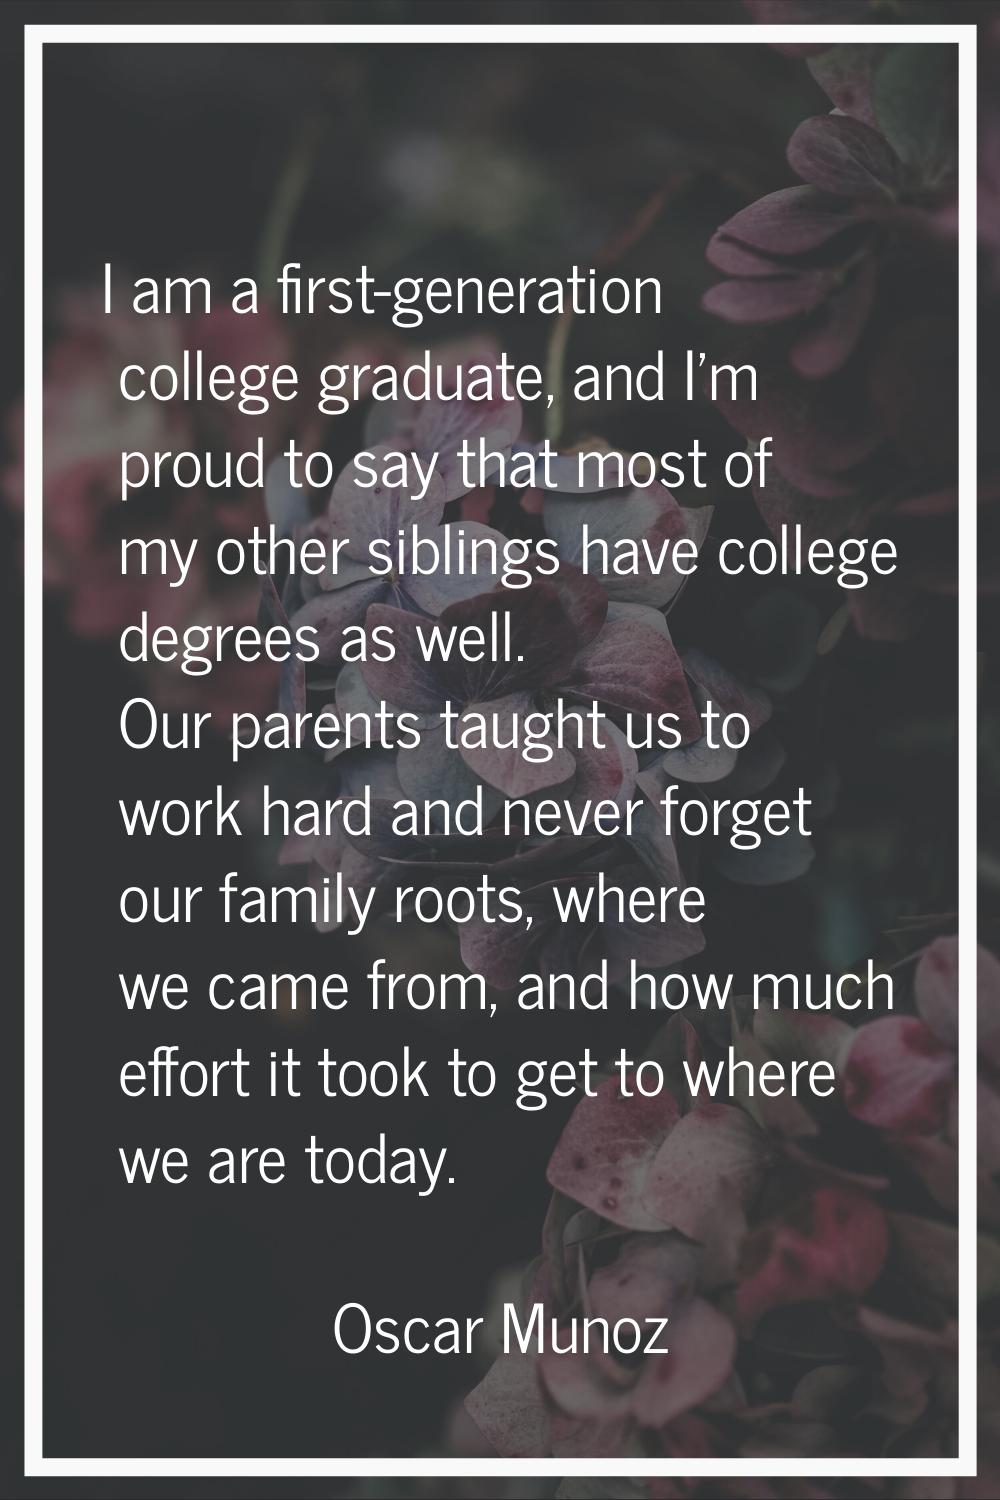 I am a first-generation college graduate, and I'm proud to say that most of my other siblings have 